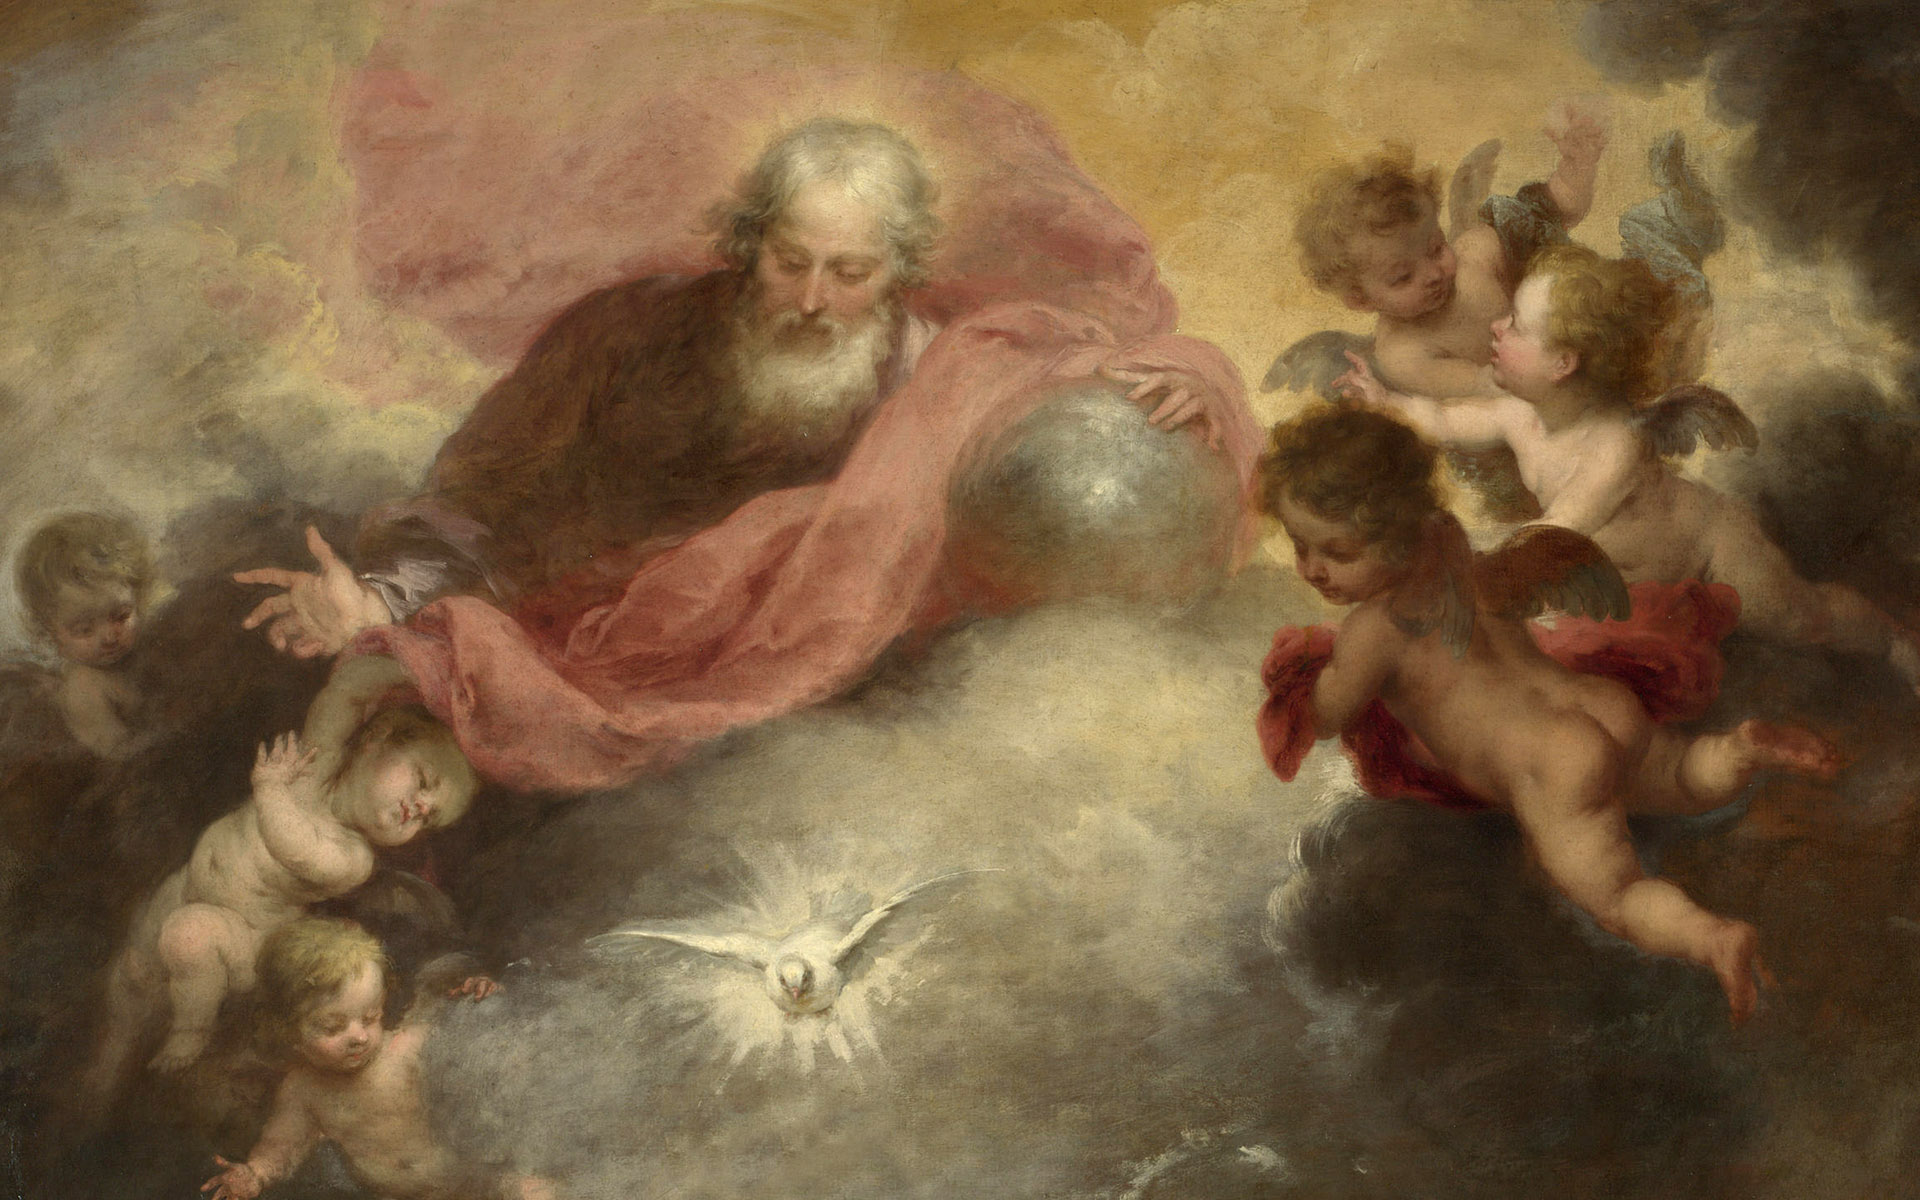 The Heavenly and Earthly Trinities by Murillo